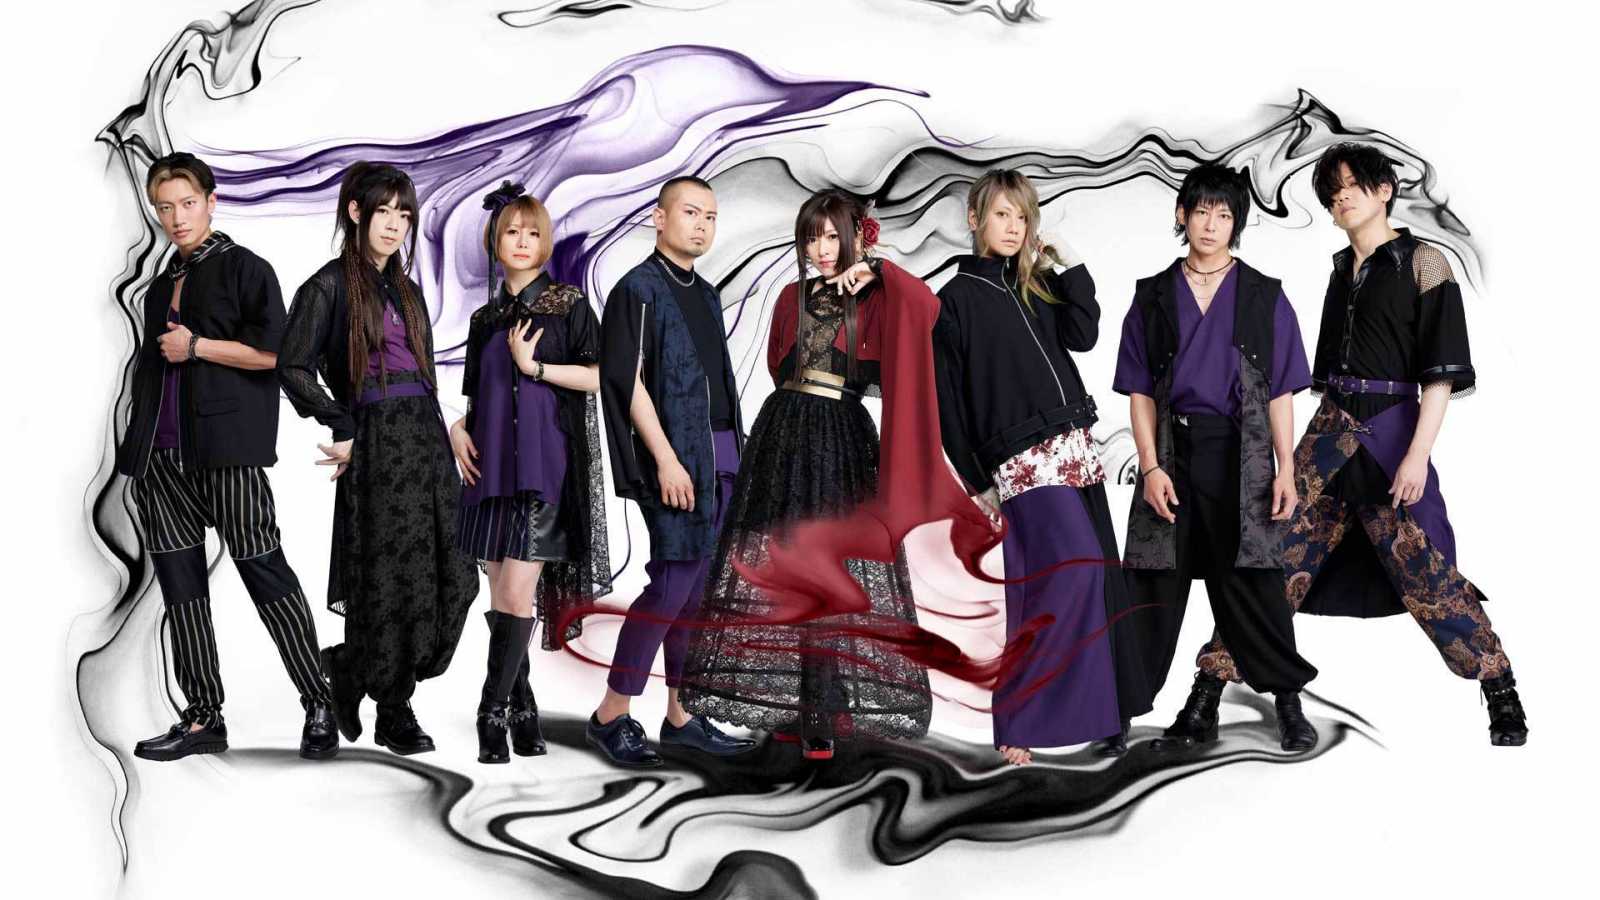 WagakkiBand © WagakkiBand. All rights reserved.